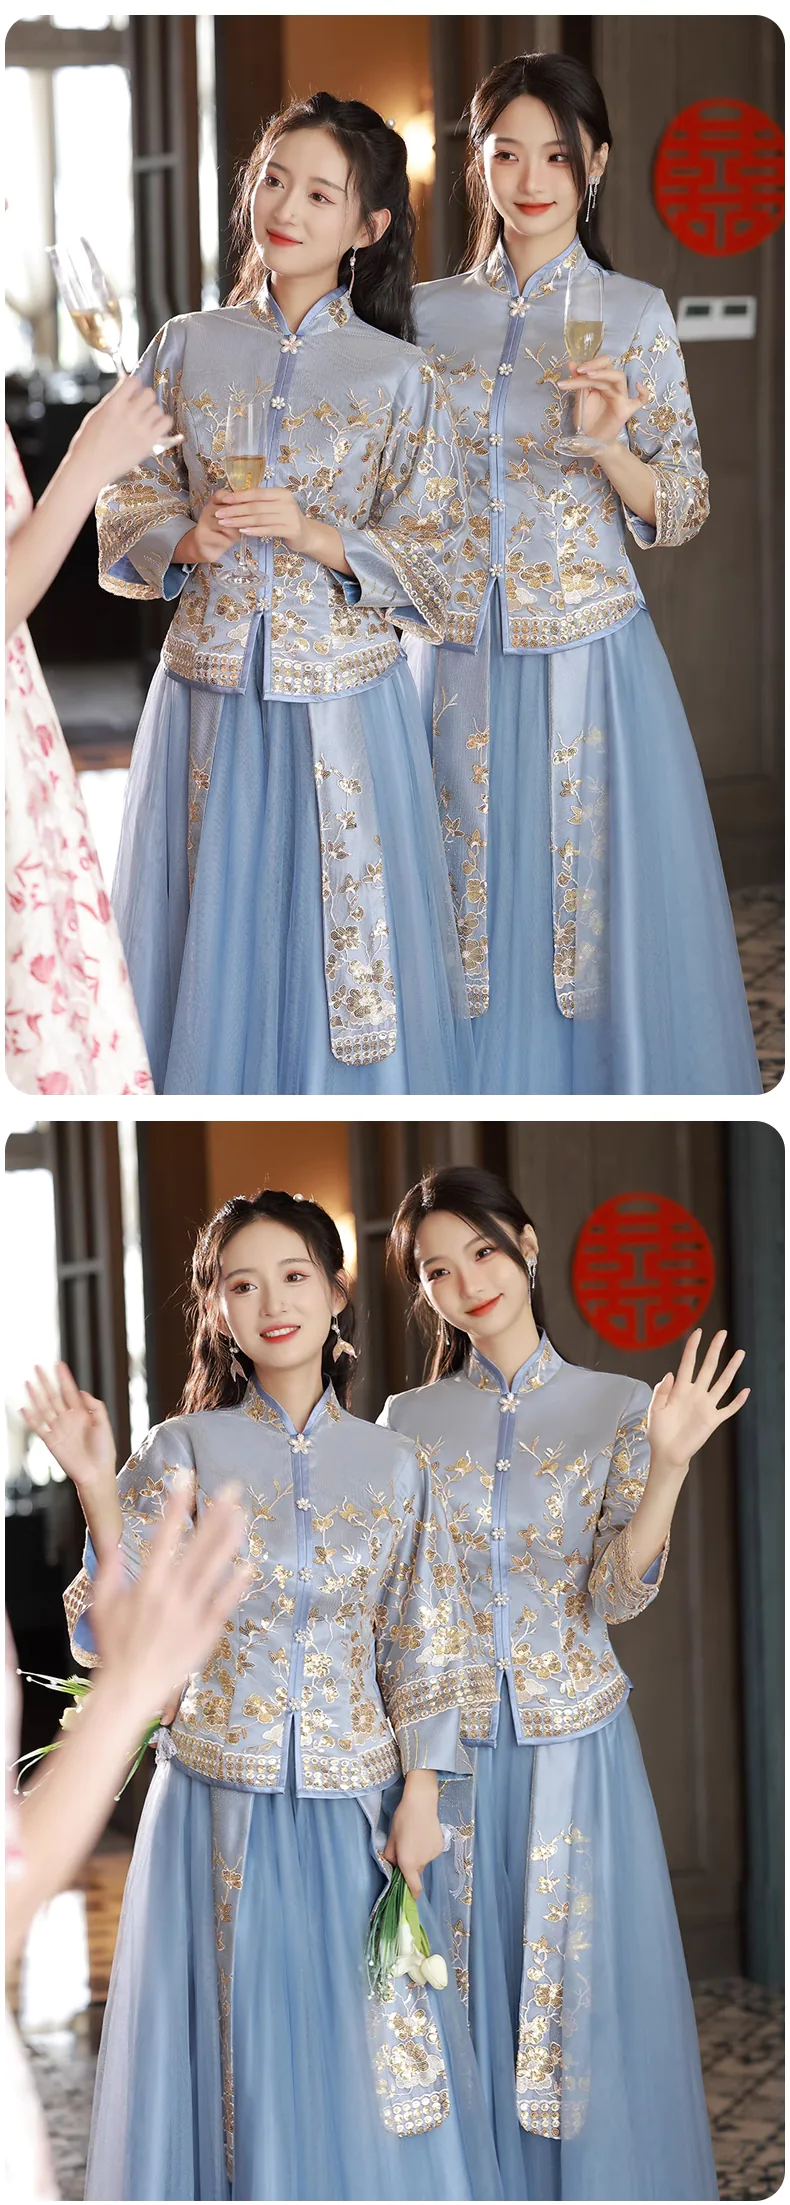 Chinese-Traditional-Style-Blue-Bridal-Wedding-Party-Bridesmaid-Dress17